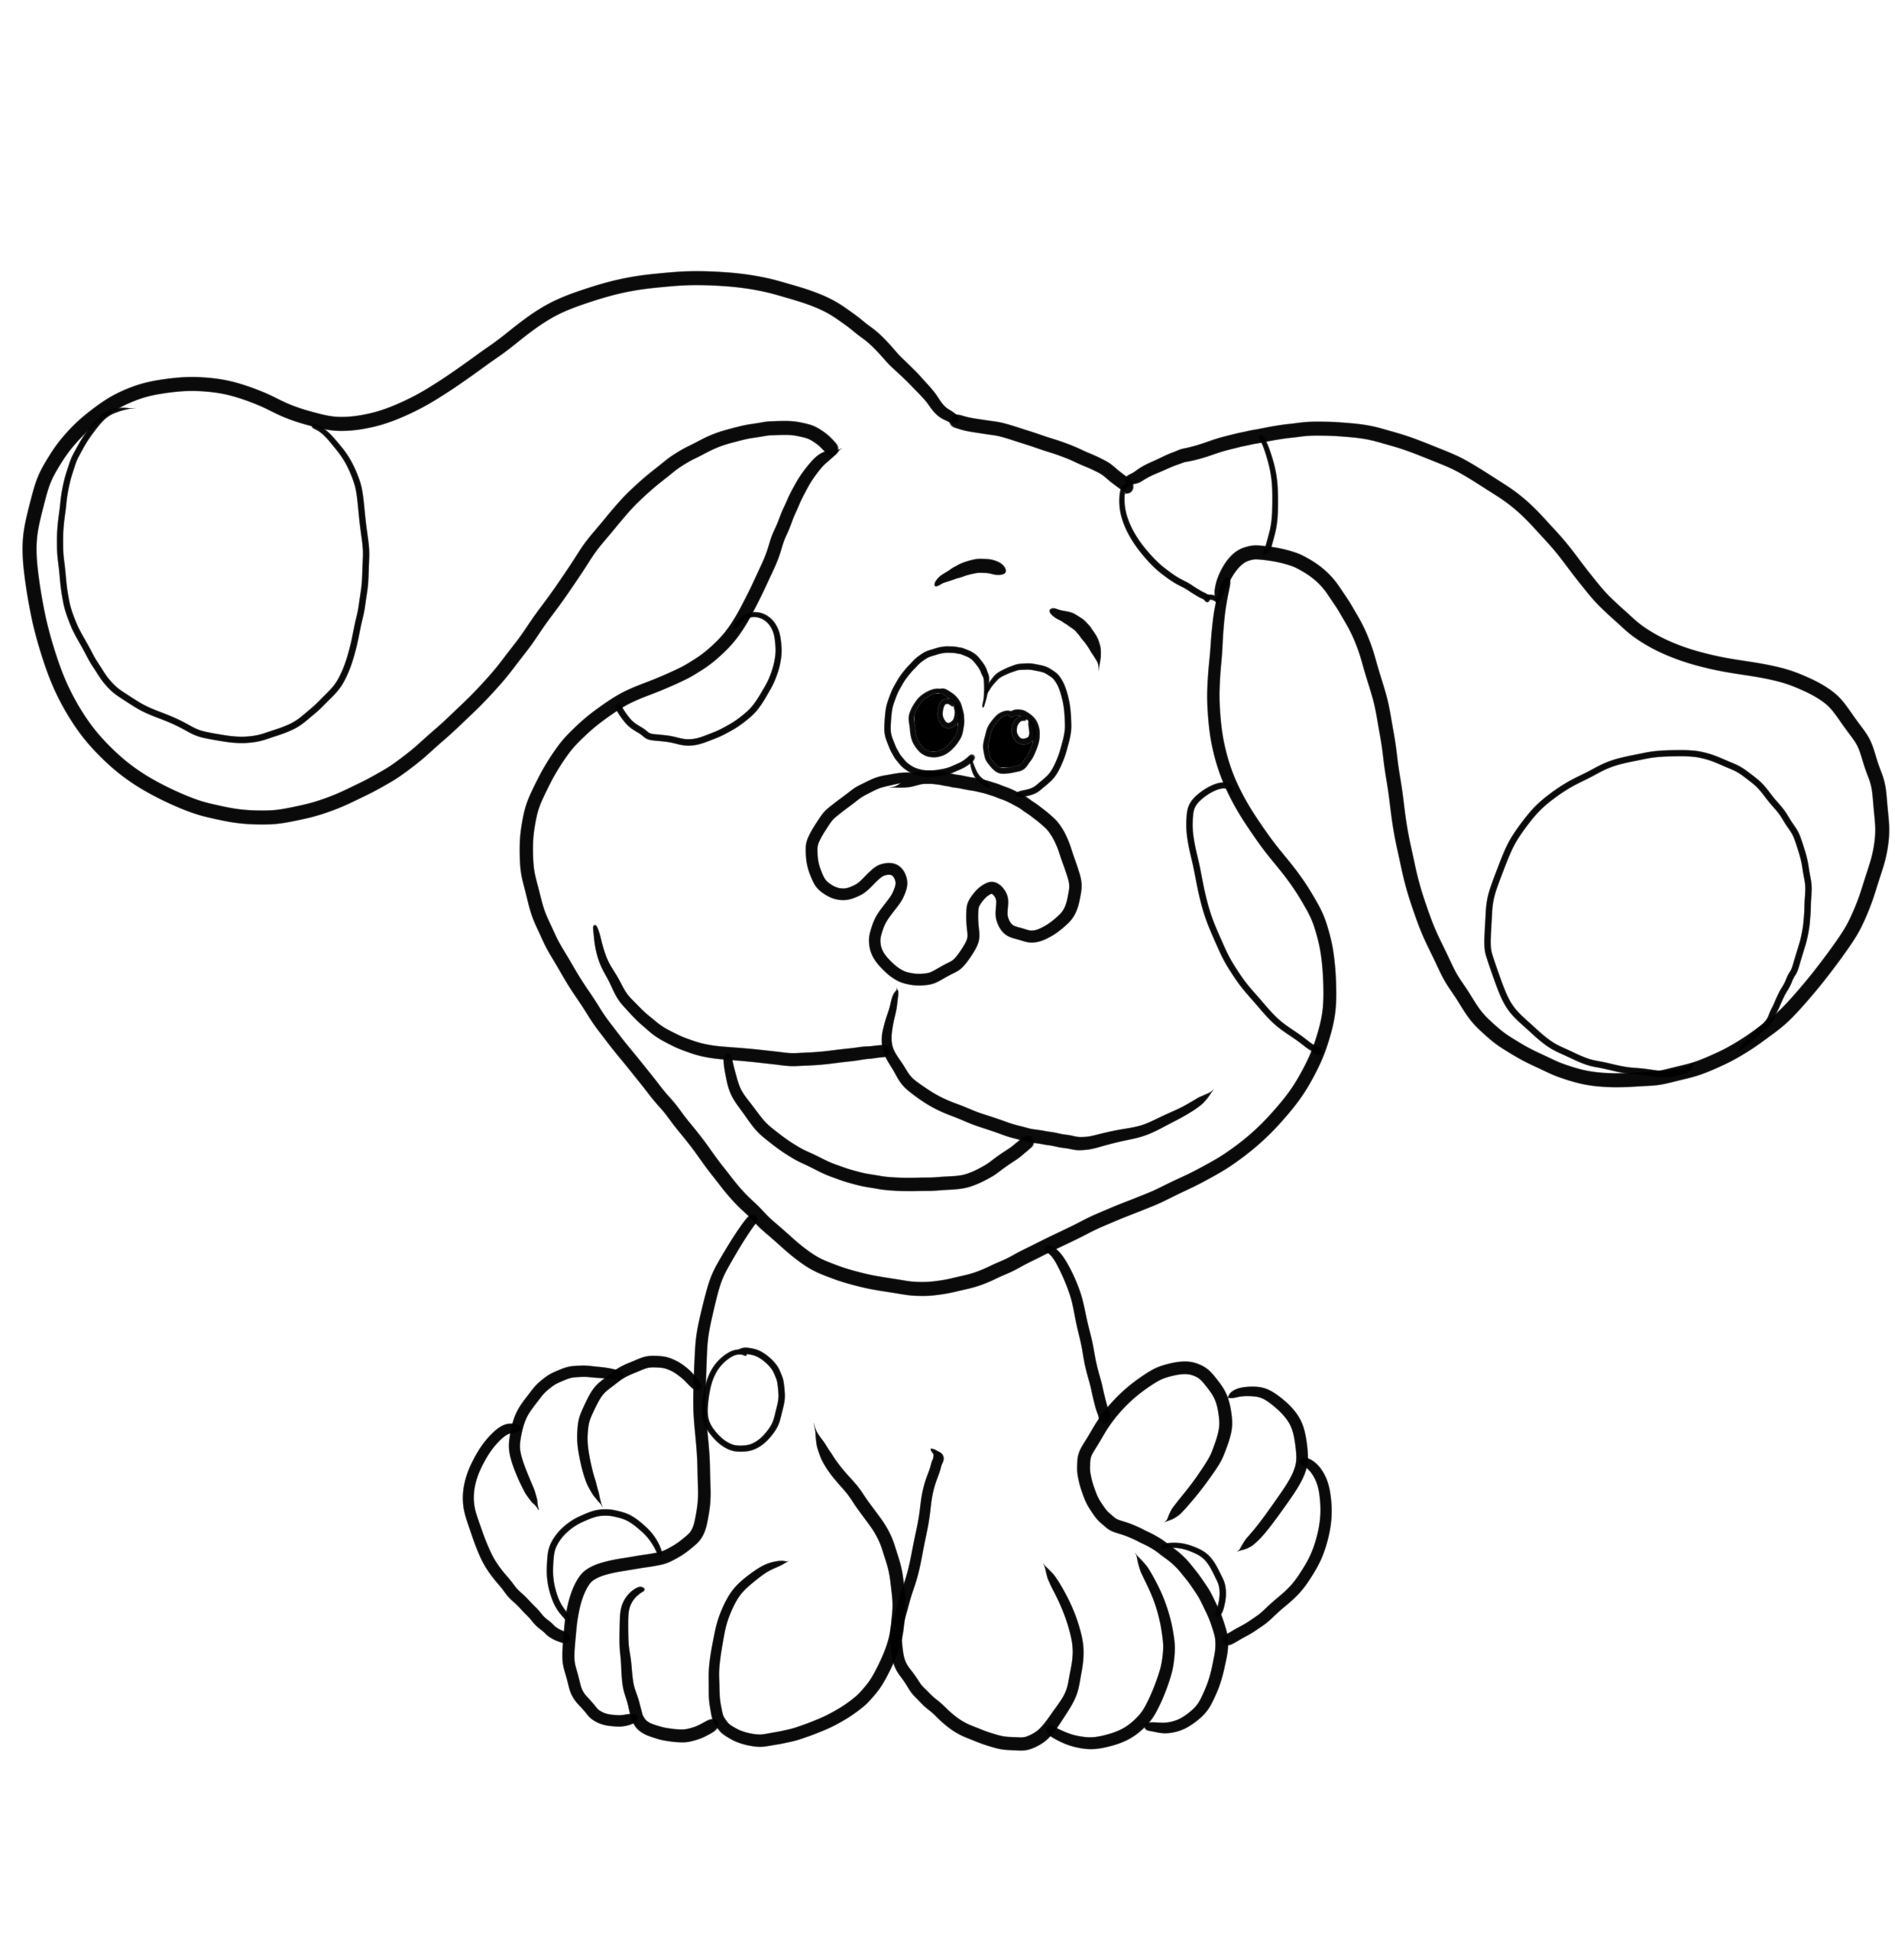 Blue's Clues 04 Blue's Clues coloring page to print and coloring